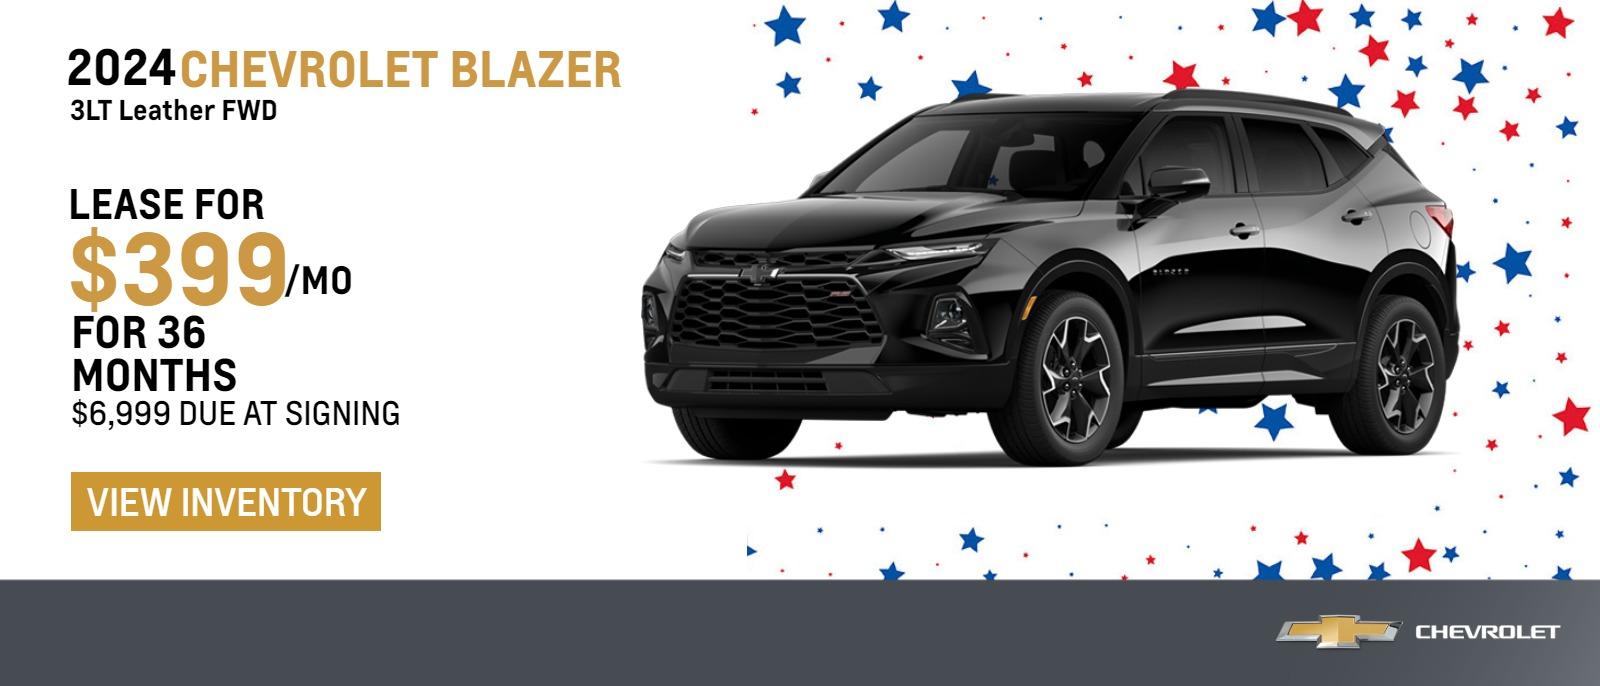 2024 Chevrolet Blazer 3LT Leather FWD
$399 Month Lease | 36 Months | $6999 Due at signing